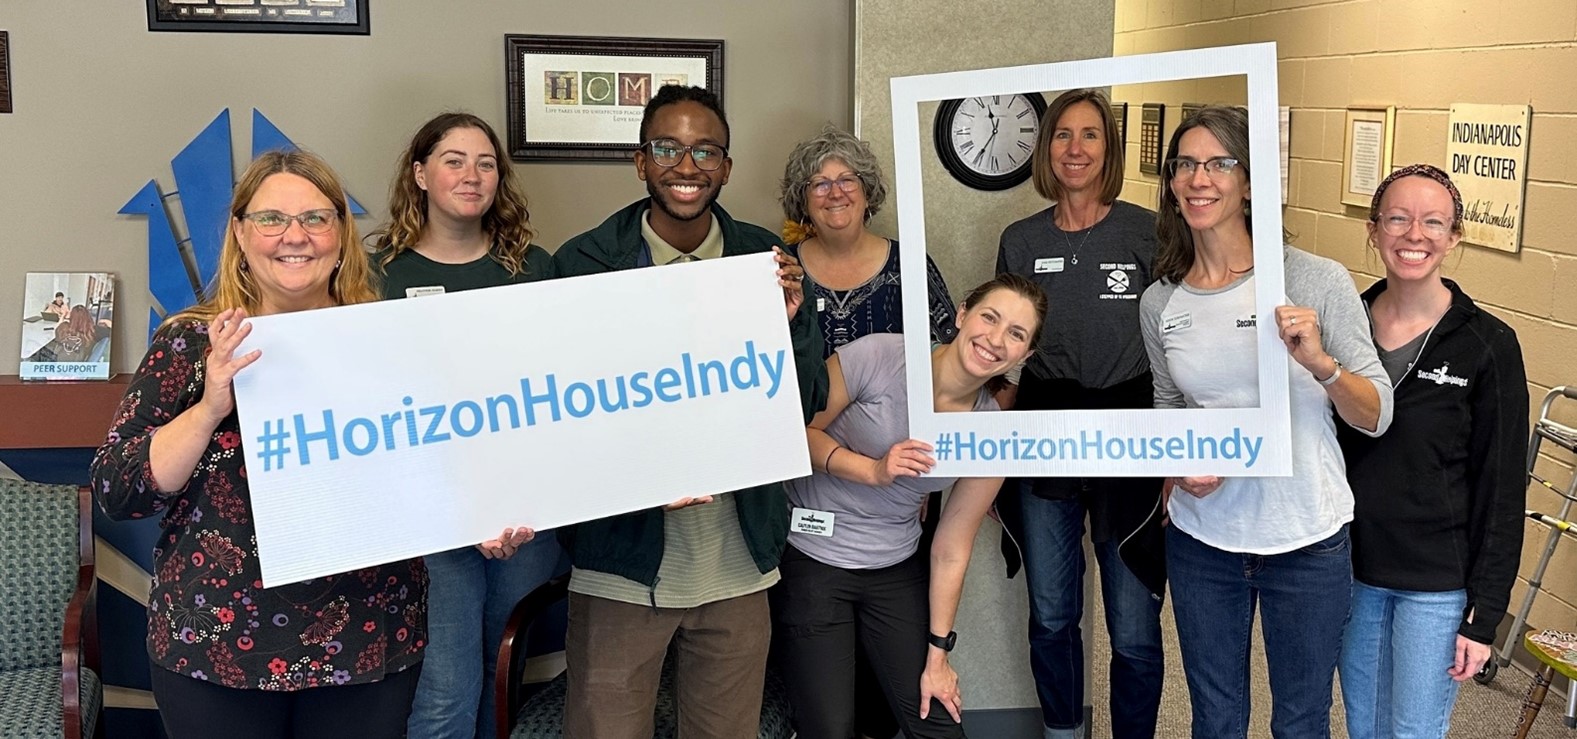 Second Helpings staff taking a group photo after volunteering at Horizon House